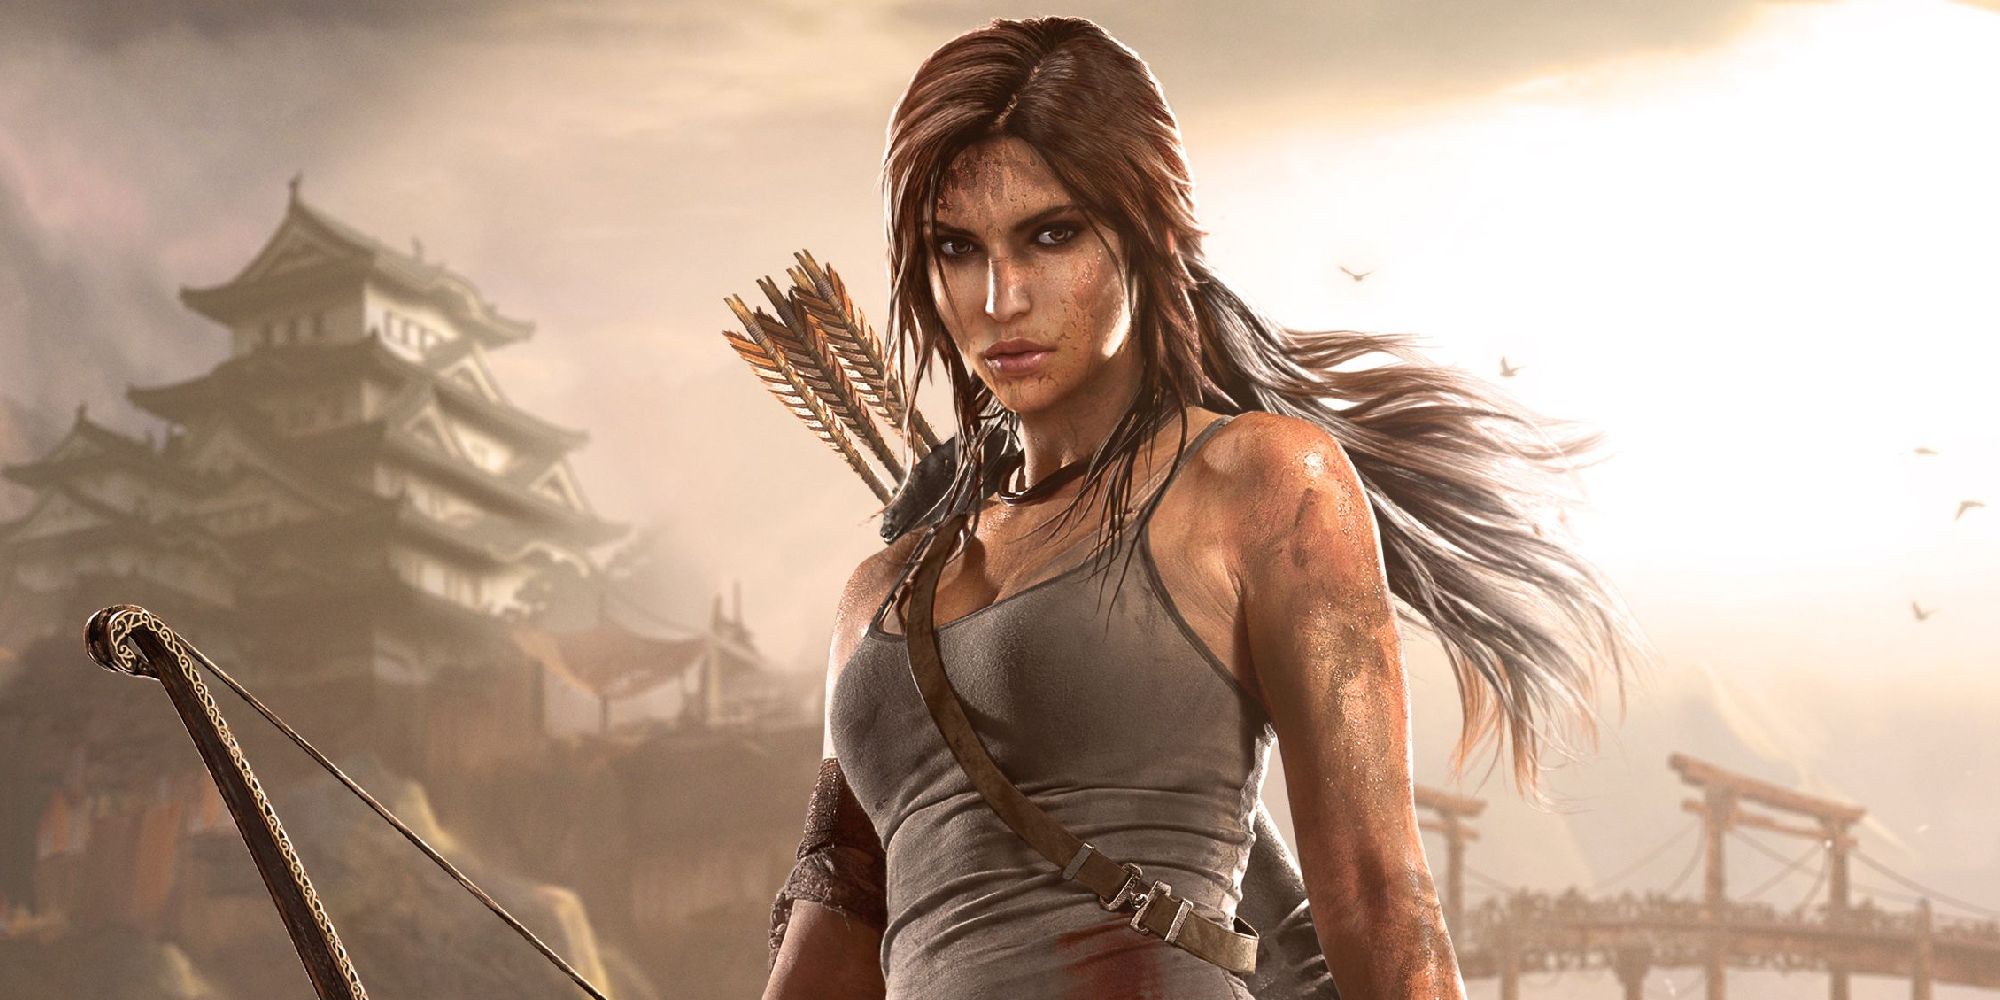 Lara Croft with her bow in a promo still from Tomb Raider 2013